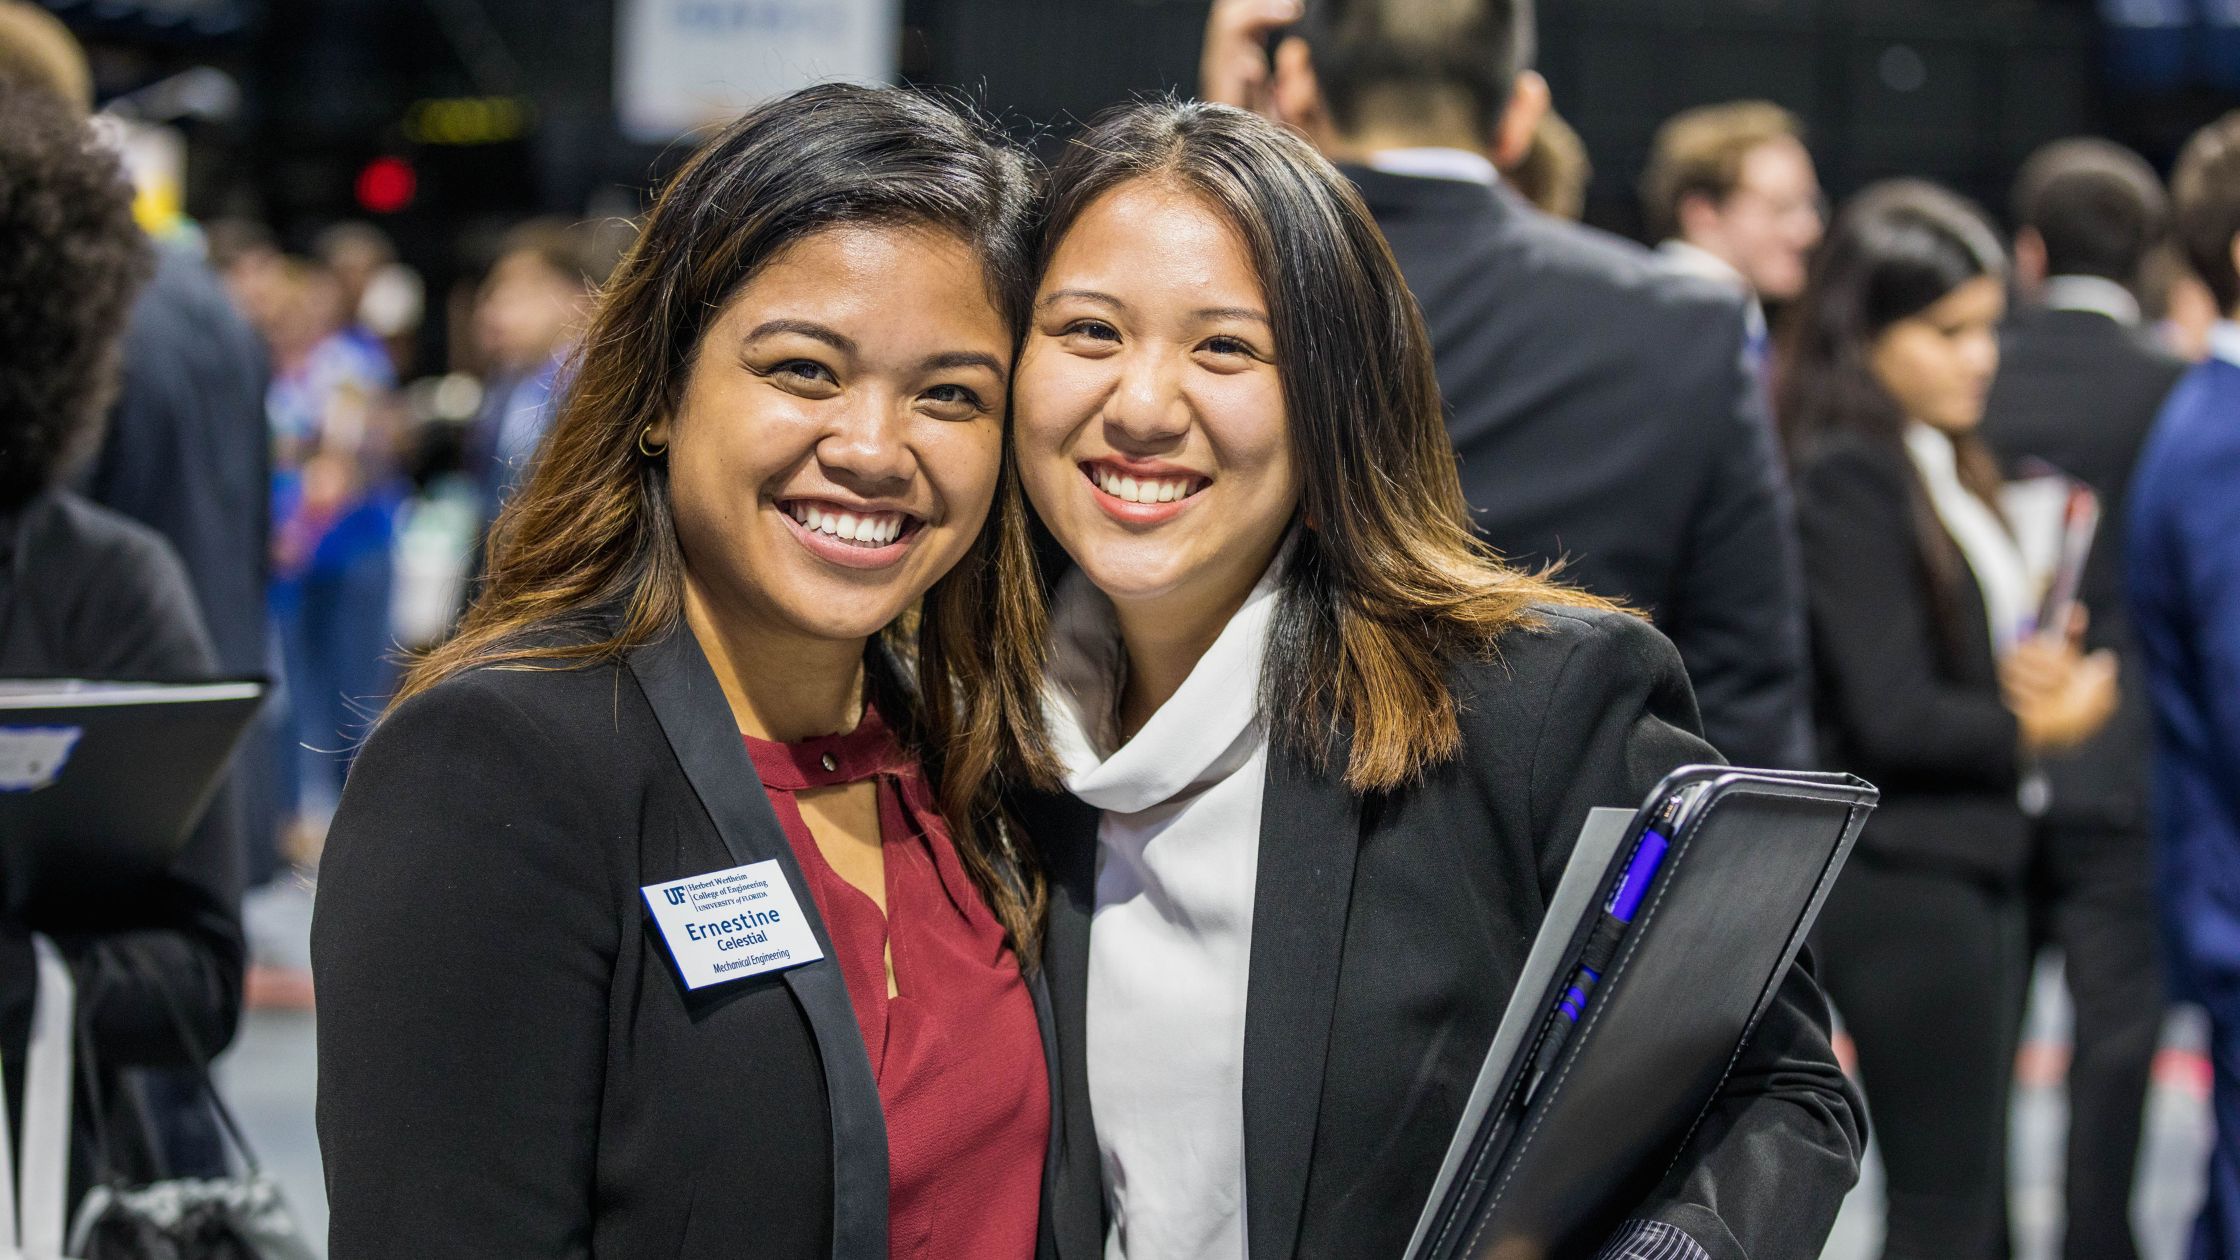 Two attendees smiling for camera at career showcase